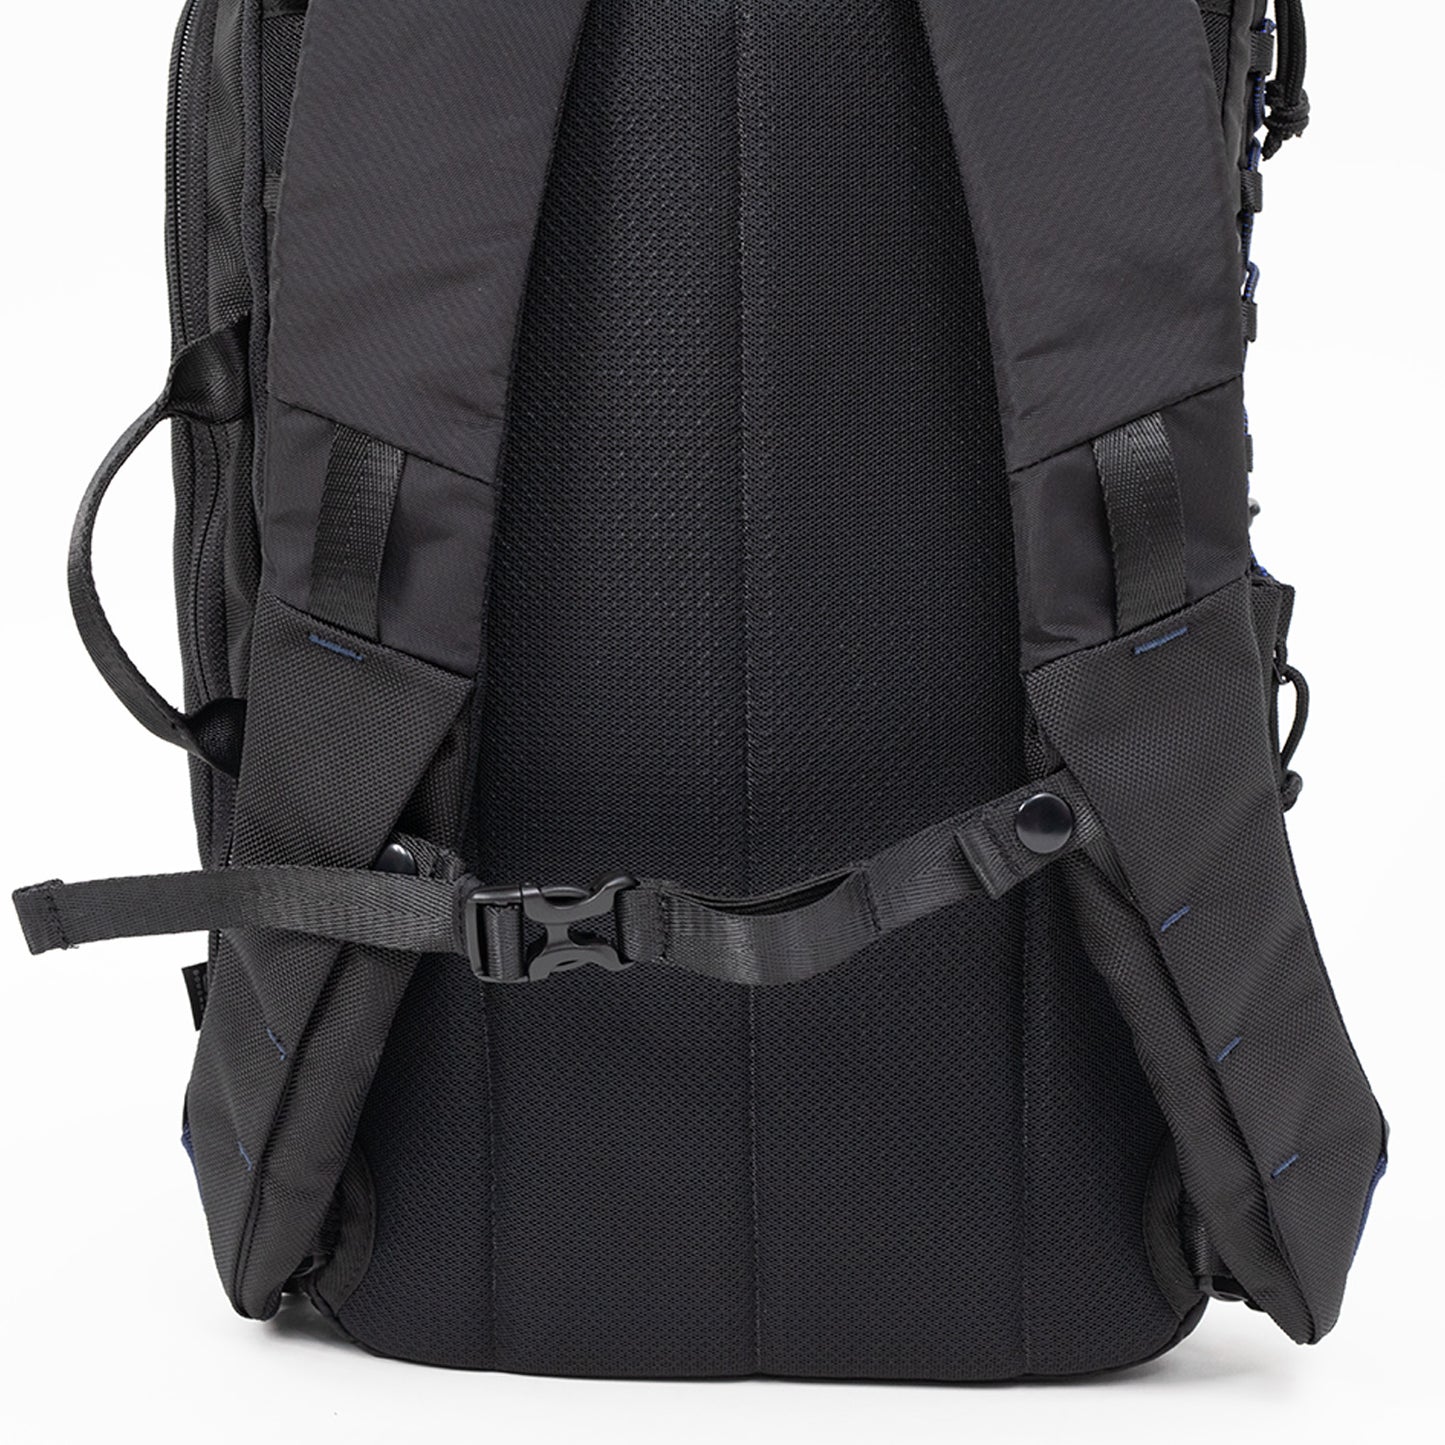 Sturdy The Actualise Series Backpack